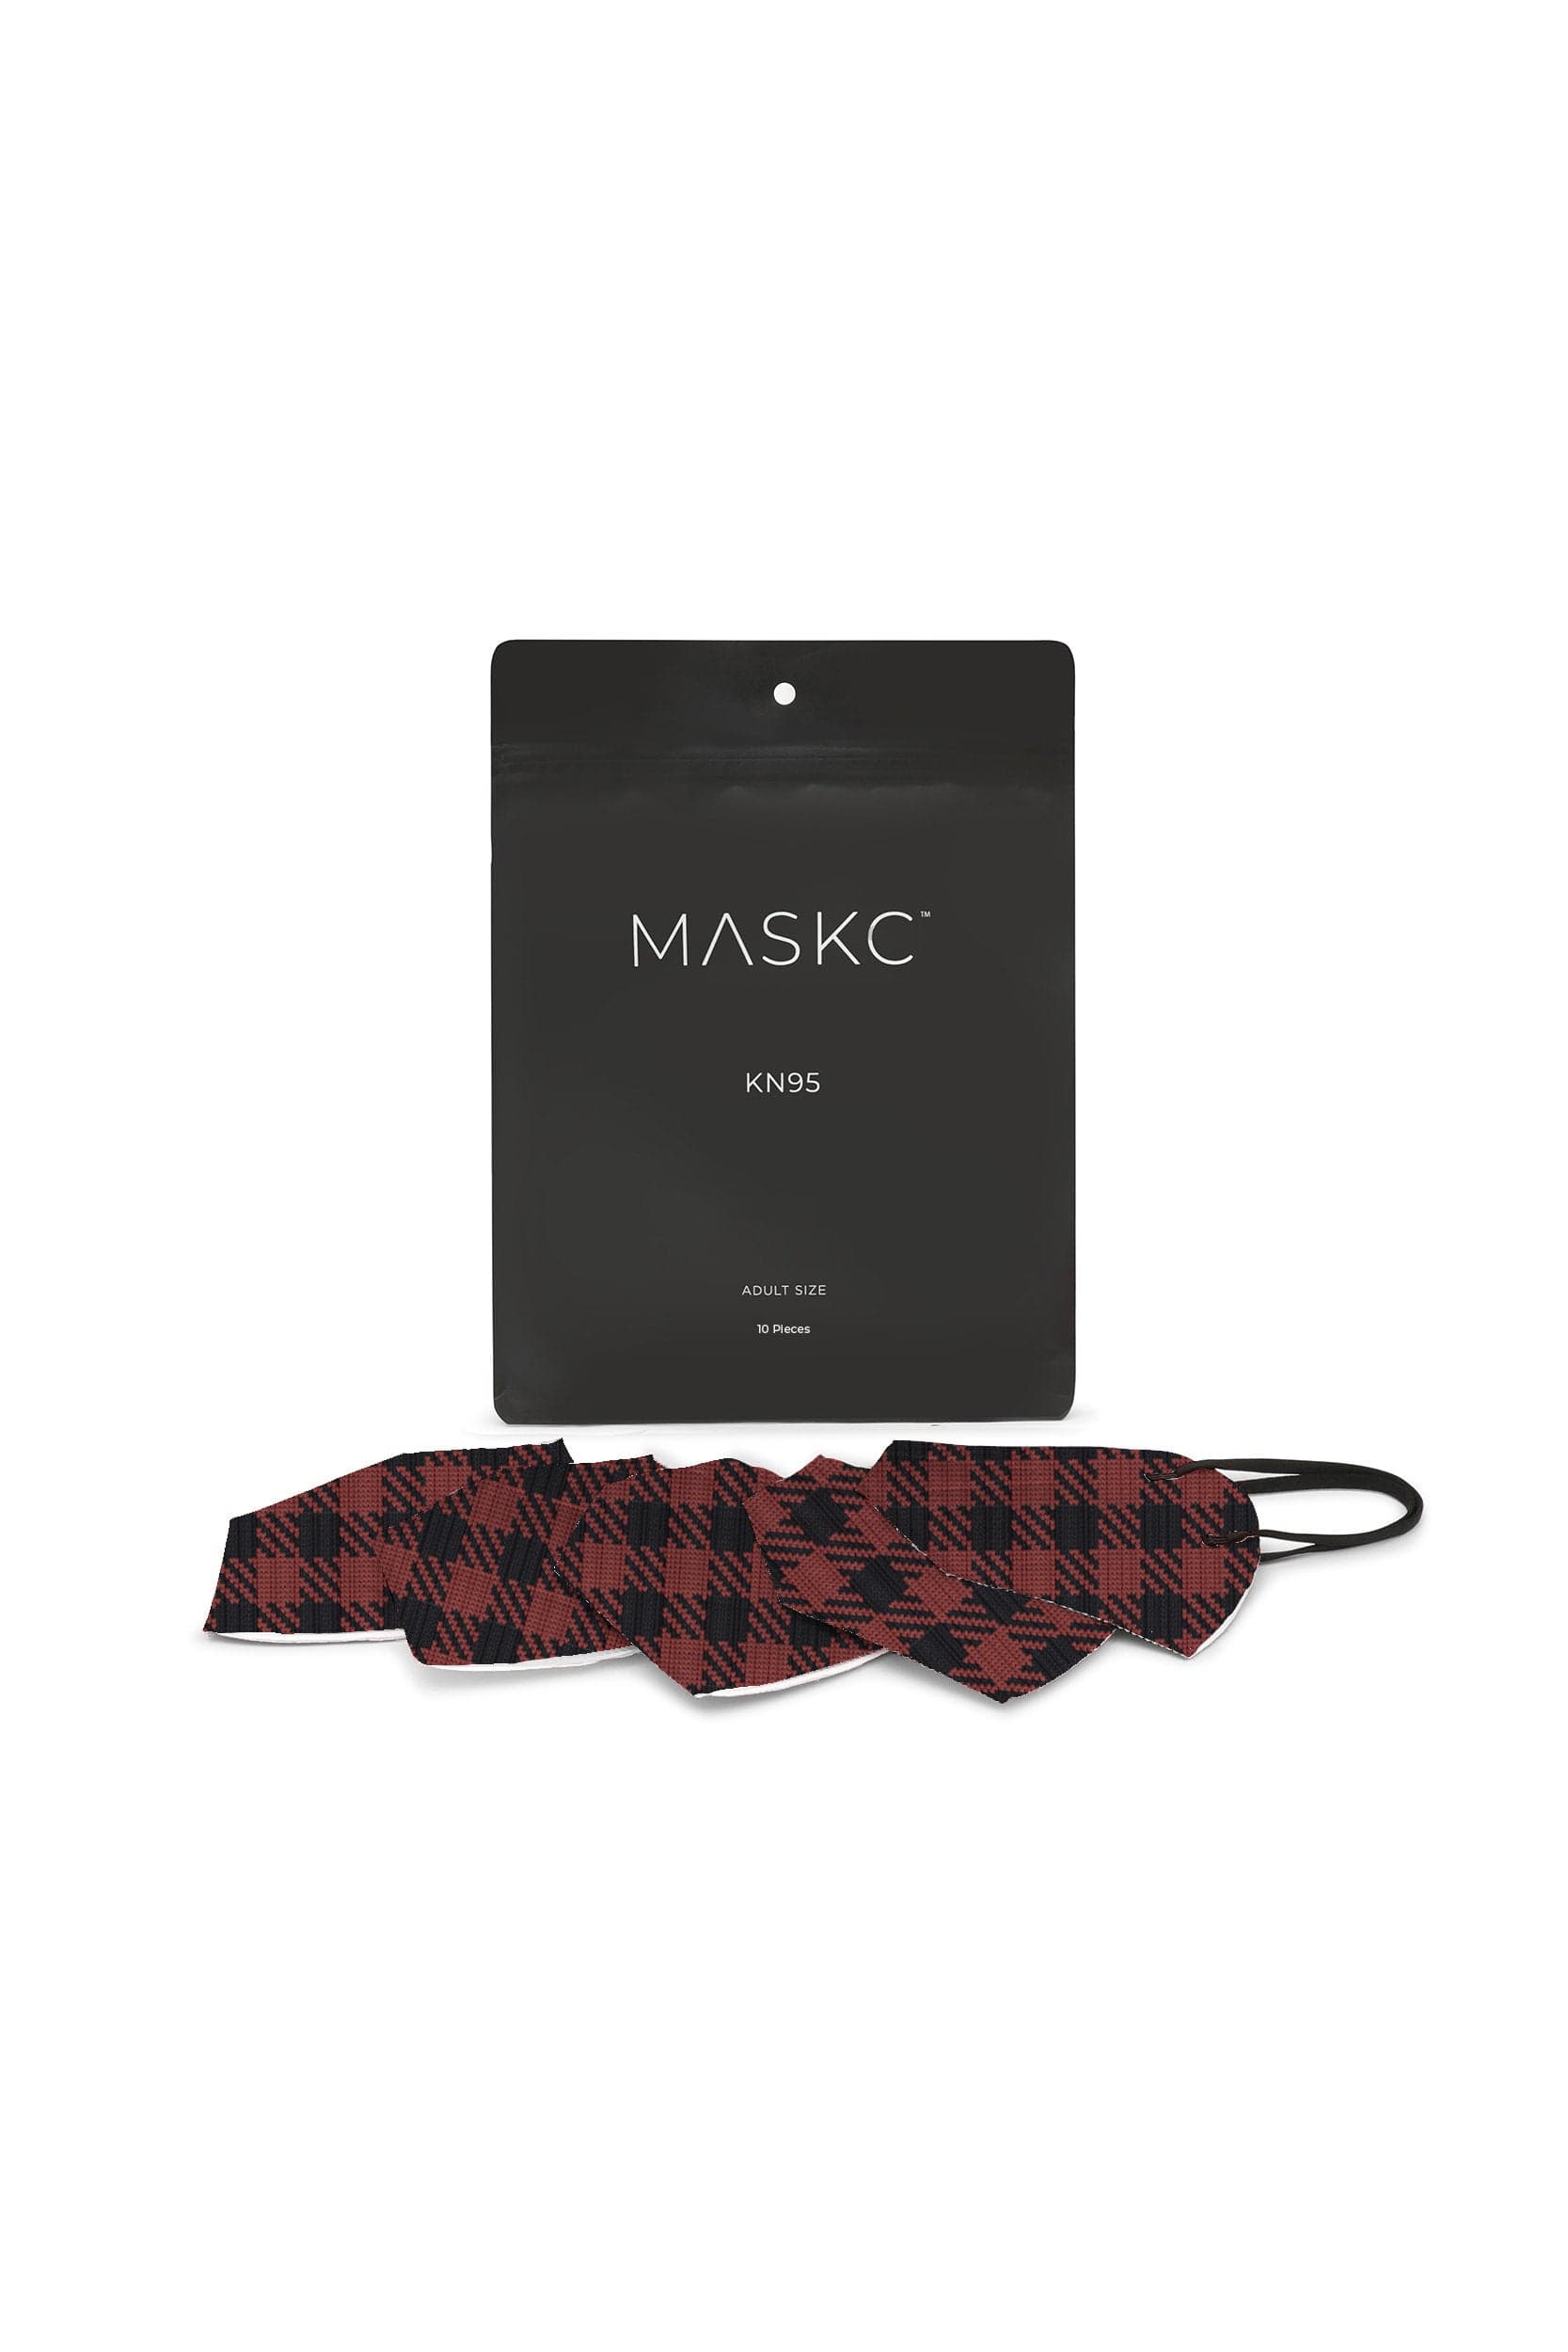 Pack of Red Plaid KN95 face masks. Each pack contains stylish high quality face masks. 